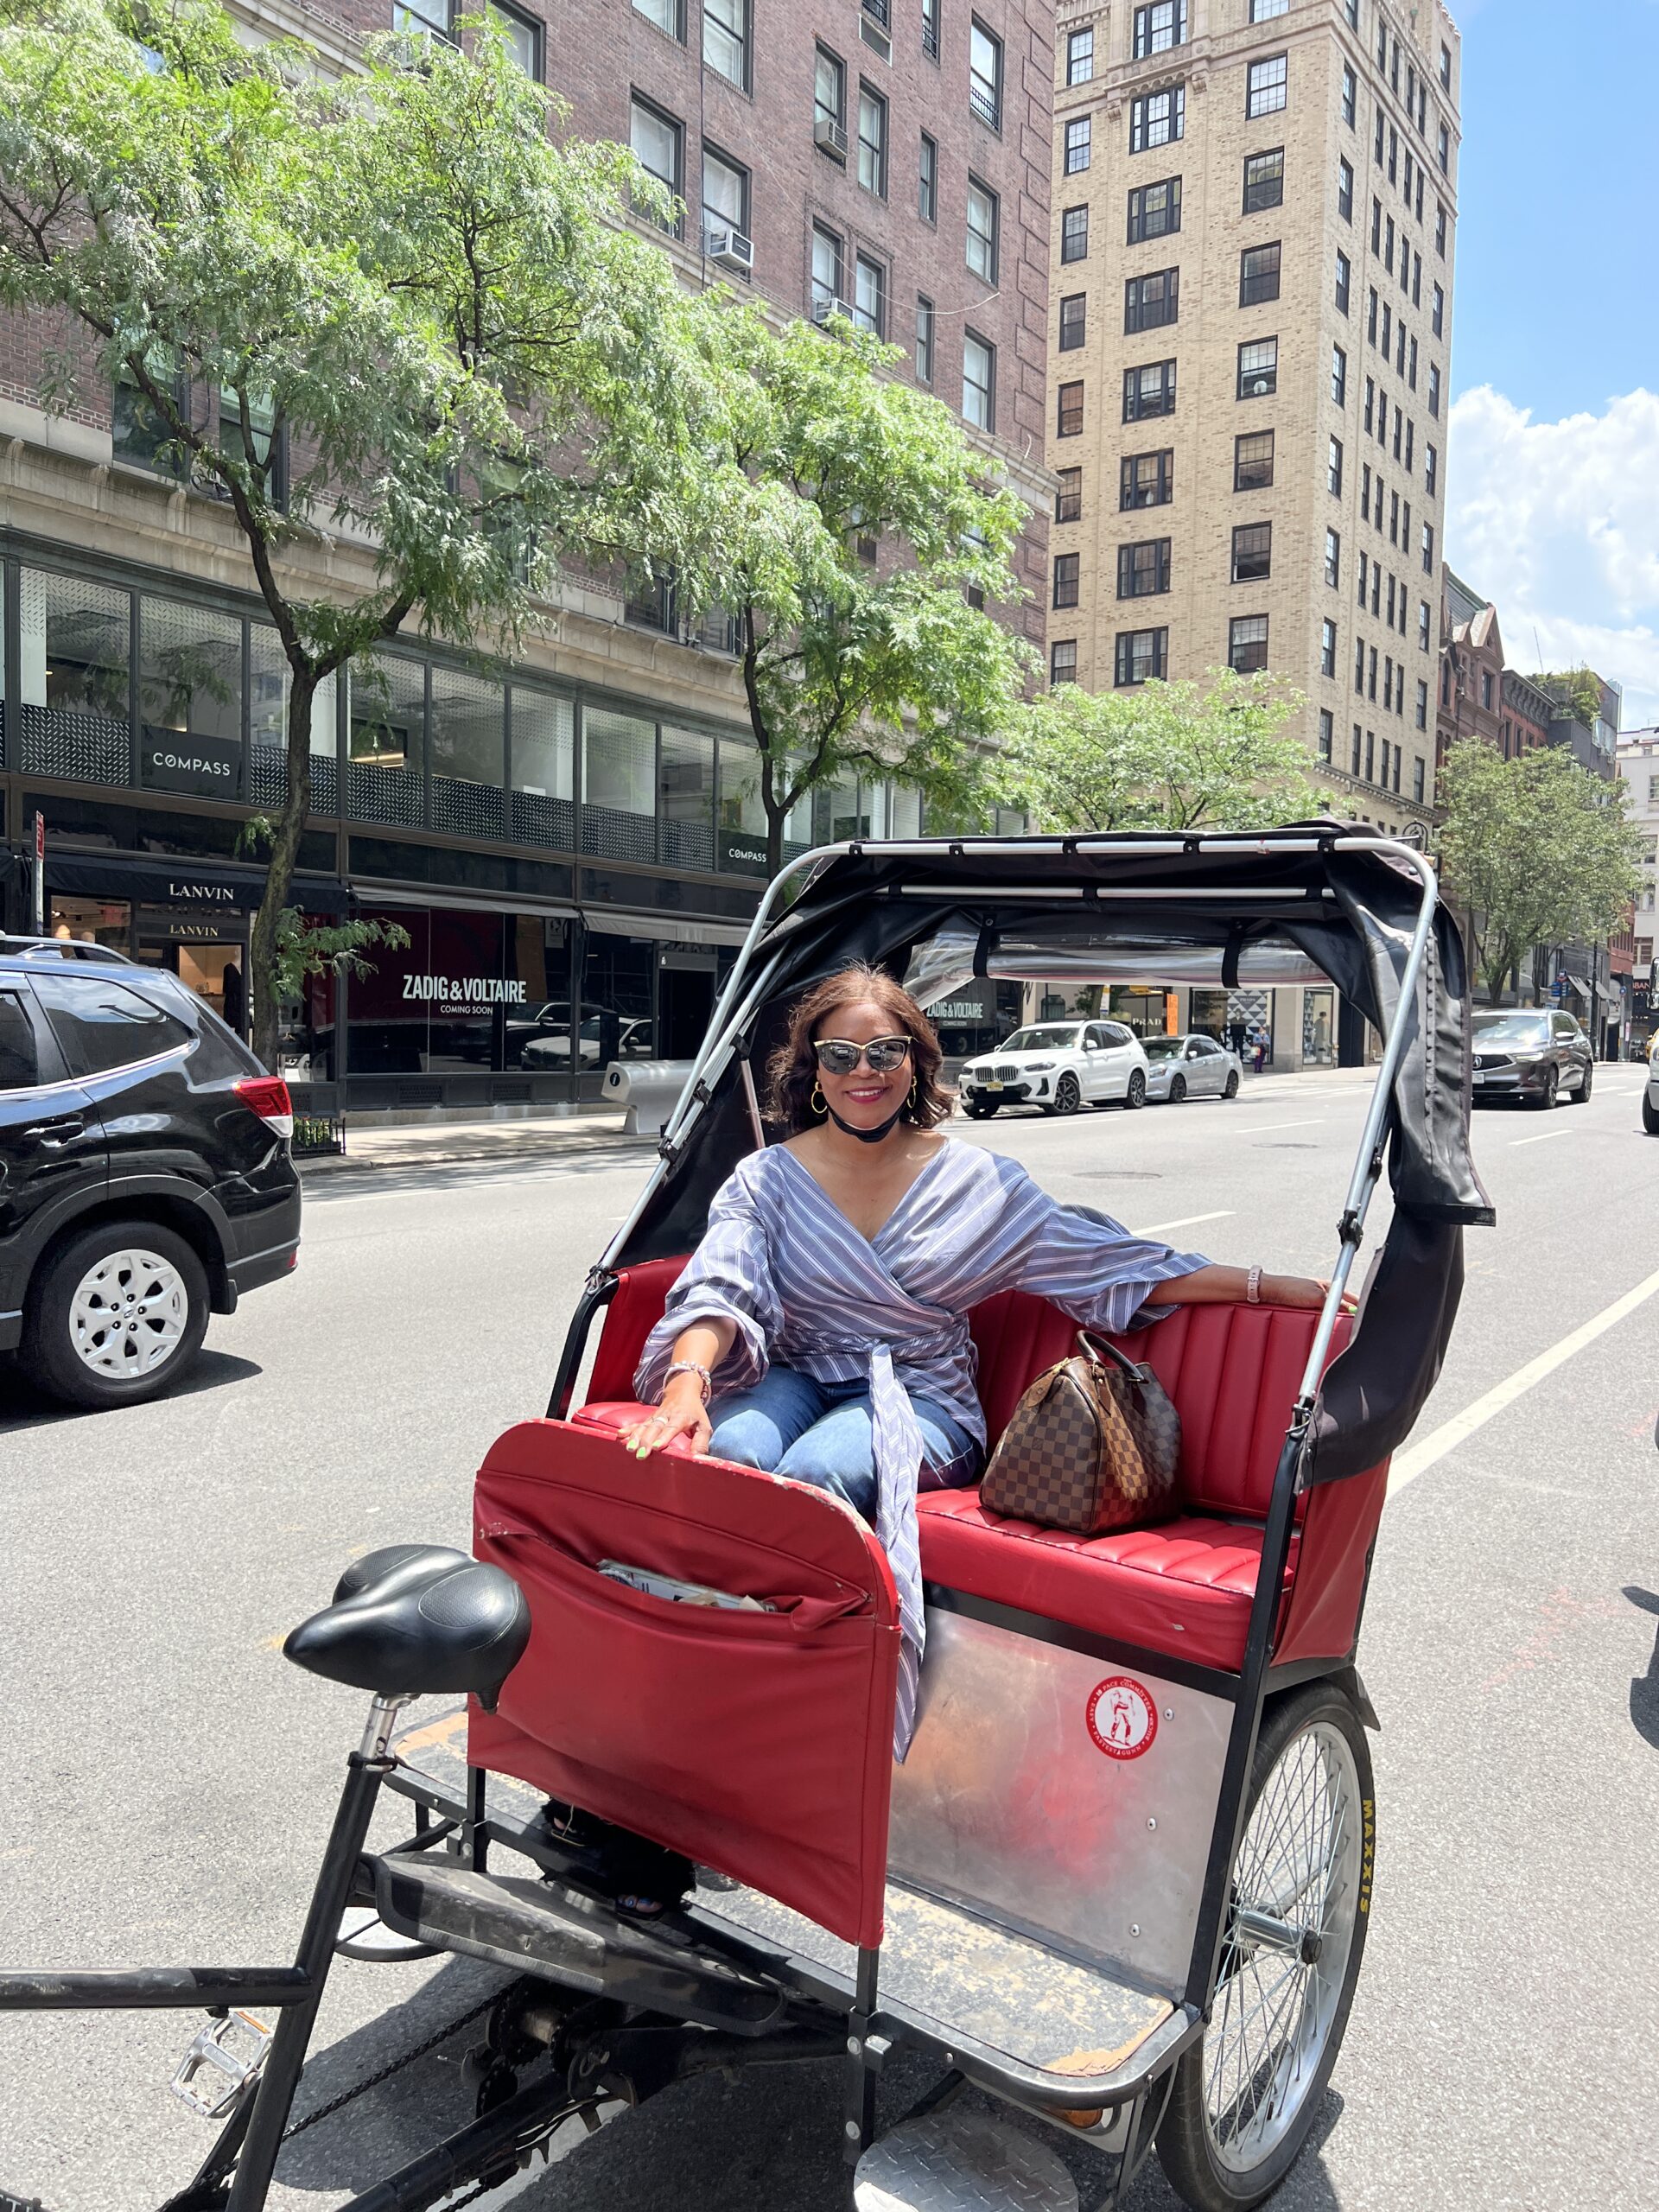 My first ride in NYC pedicab, solo! a memorable weekend experience